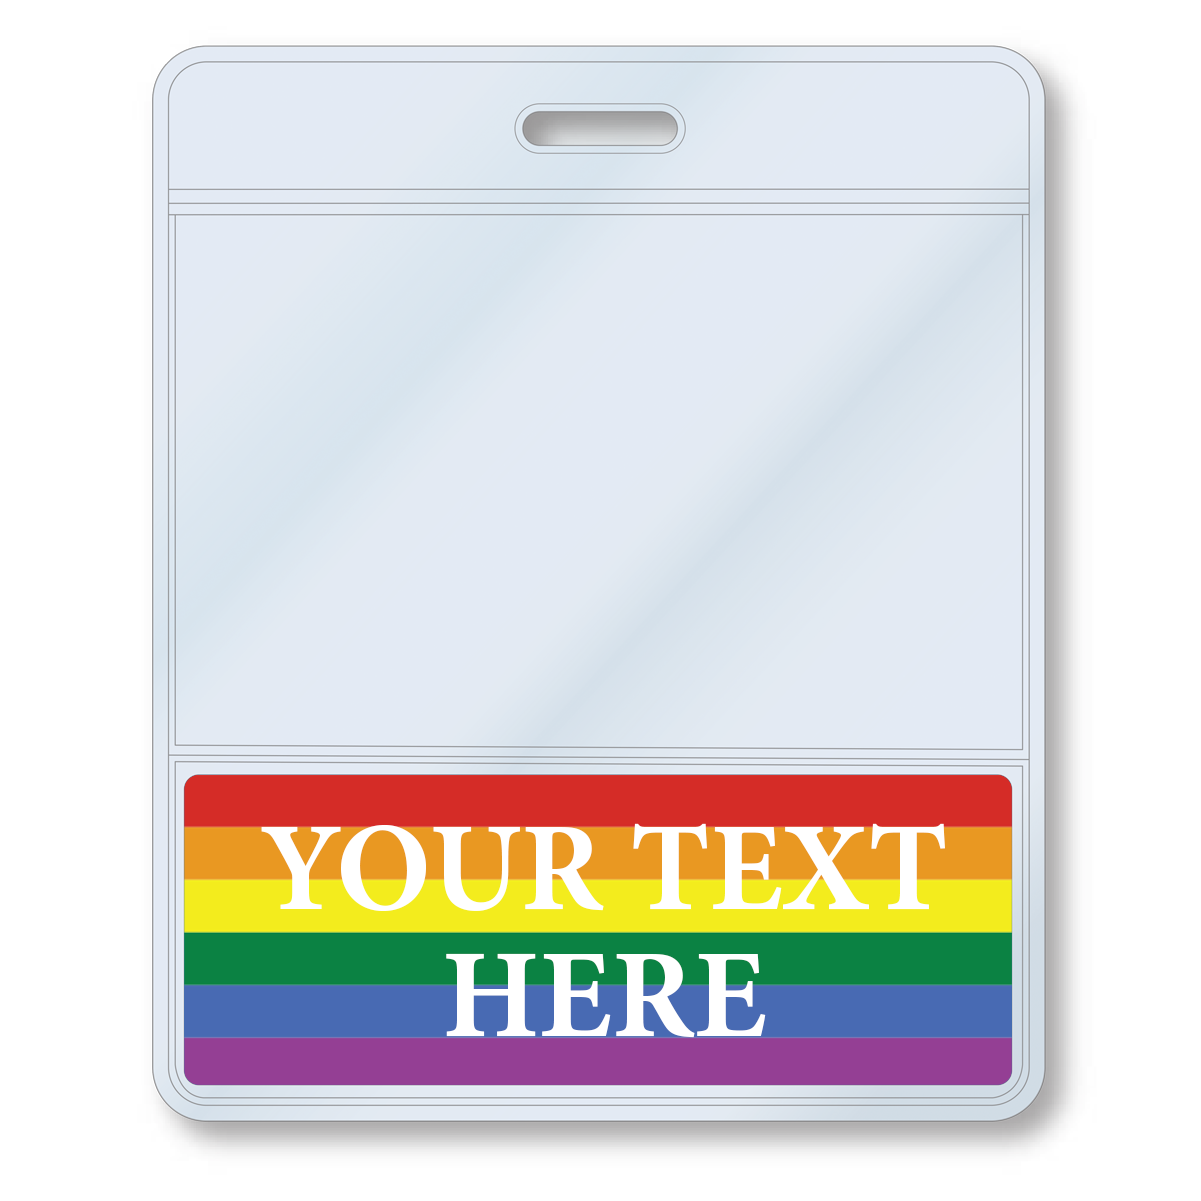 A Custom Printed BadgeBottoms® Horizontal (Badge Holder & Badge Buddy IN ONE) with a vibrant rainbow stripe at the bottom that says "YOUR TEXT HERE," perfect for adding your customizable title.